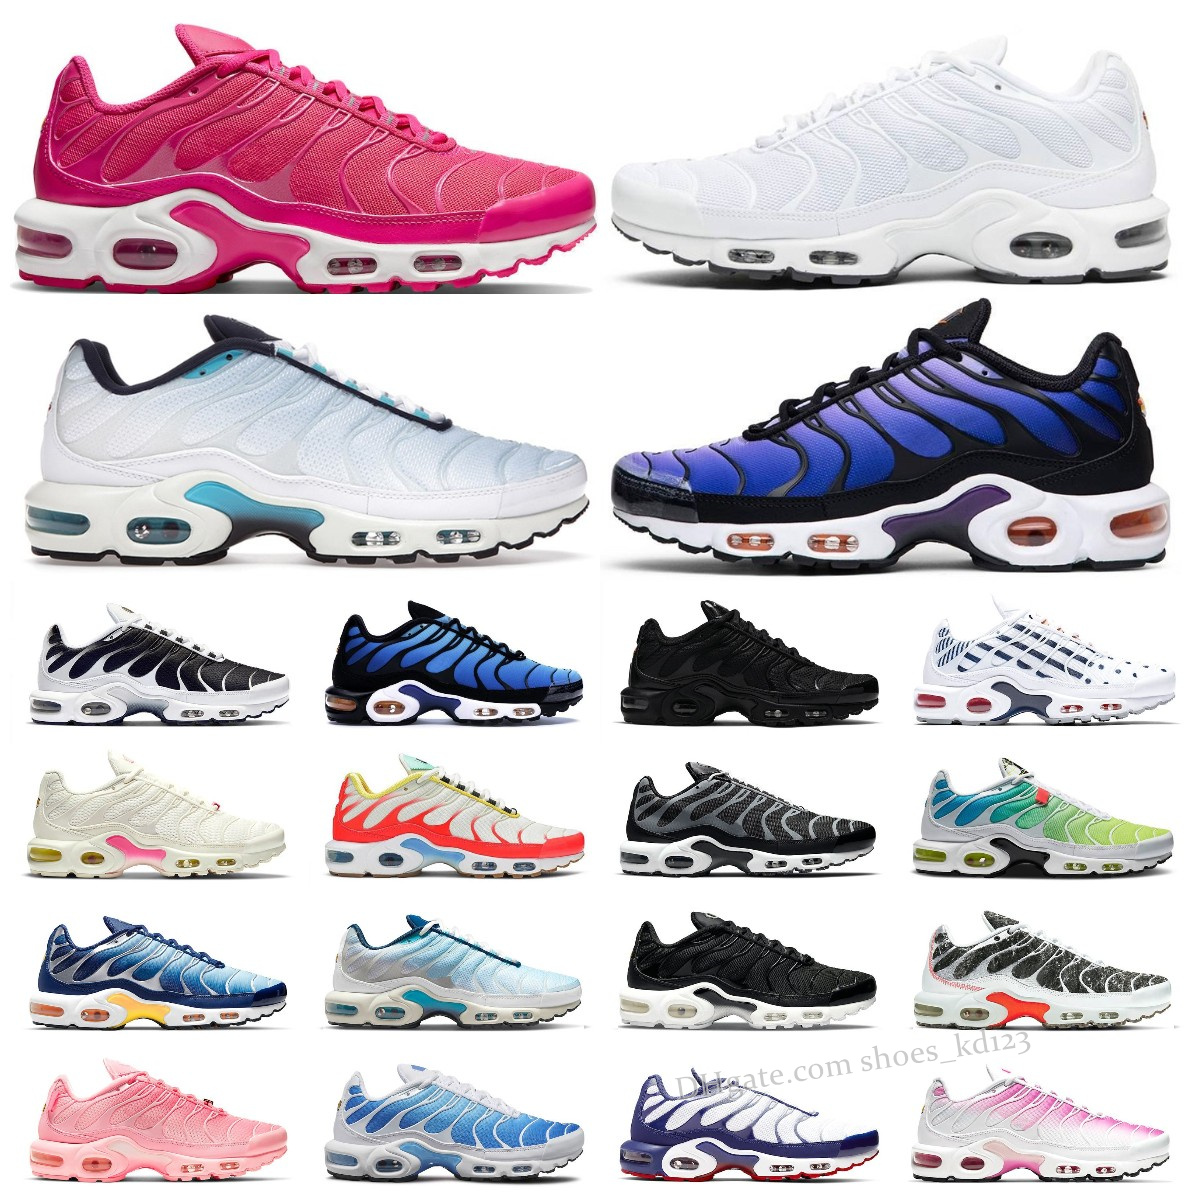 

tn plus men woman running shoes Triple Black Royal White Mint Green Wolf Grey Pink Fade Psychic dasigner sneakers for mens womens tns outdoor casual shoes, Bubble bag